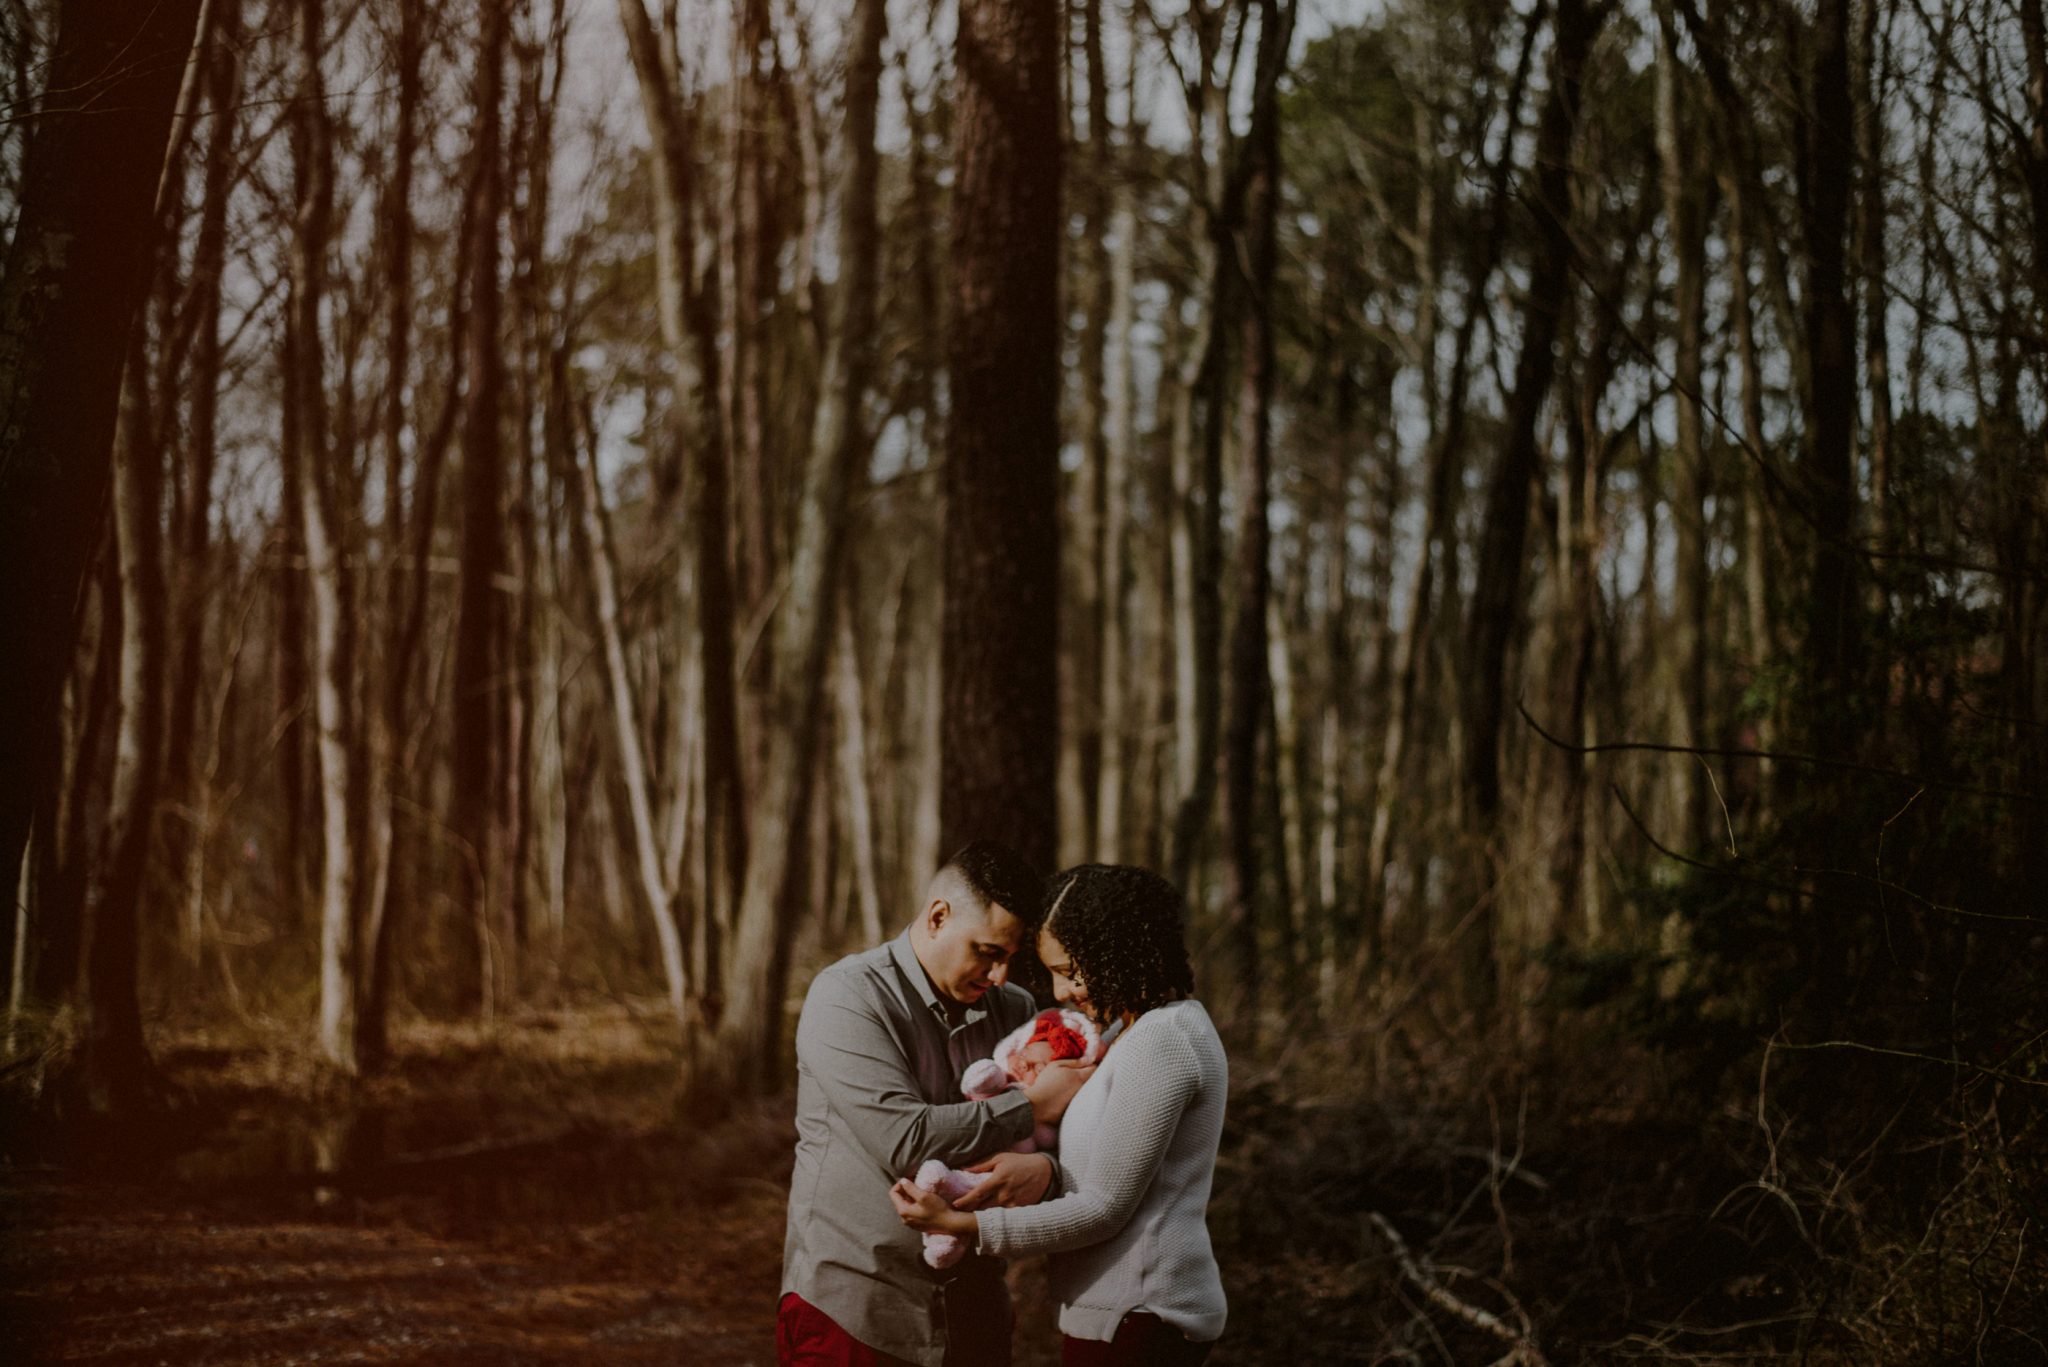 rustic outdoor family portrait in the woods with newborn surrounded by bare winter trees